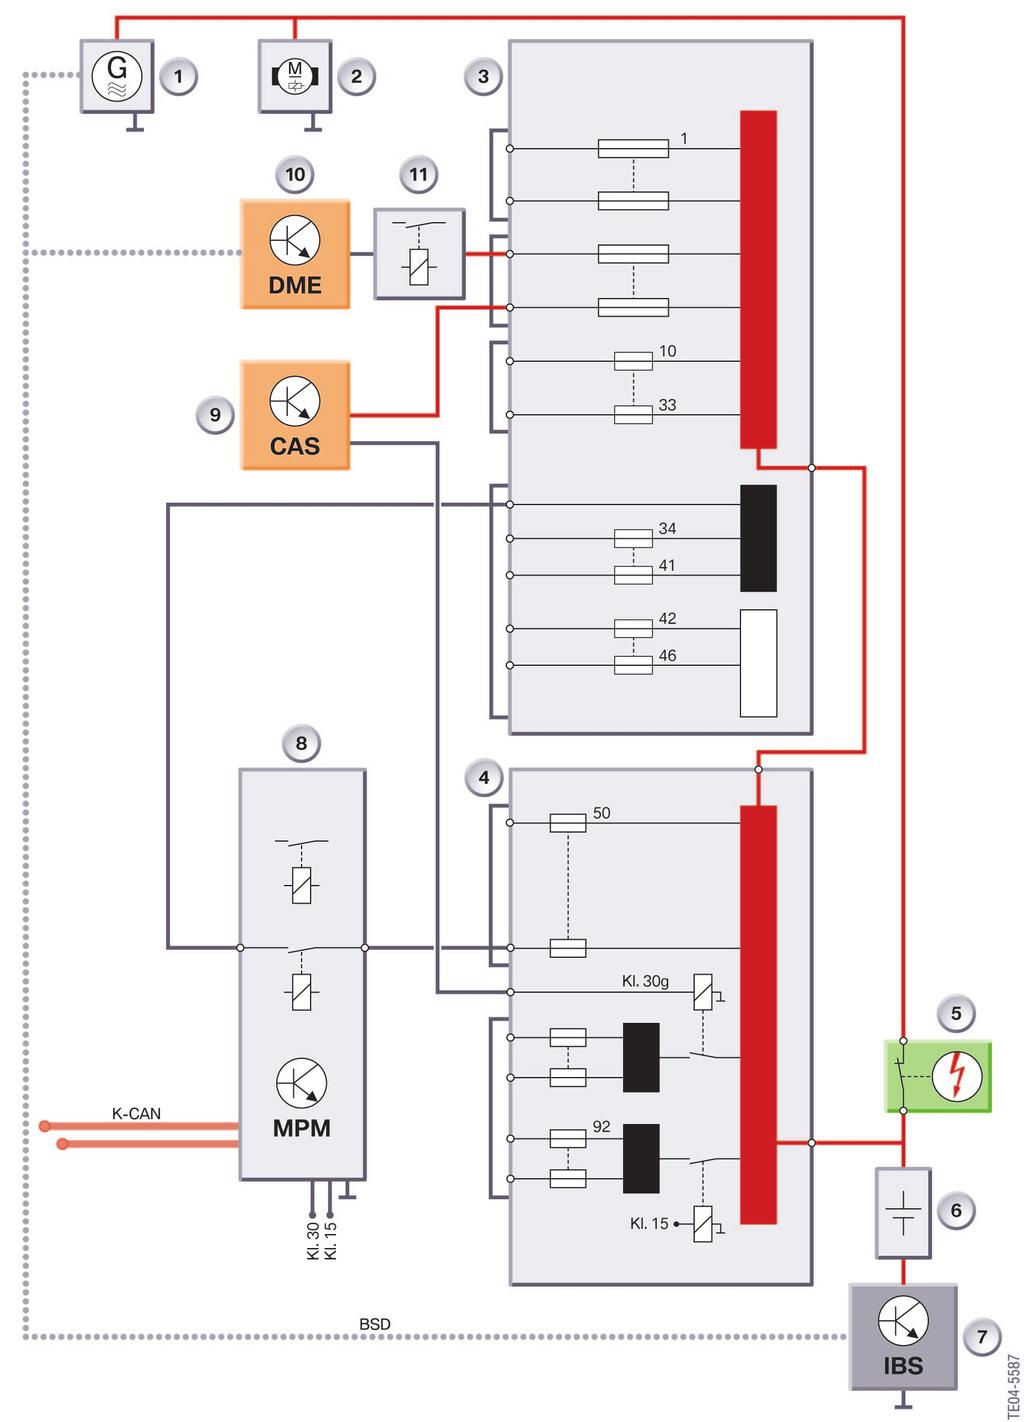 5 System diagram with micro-power module 1 -